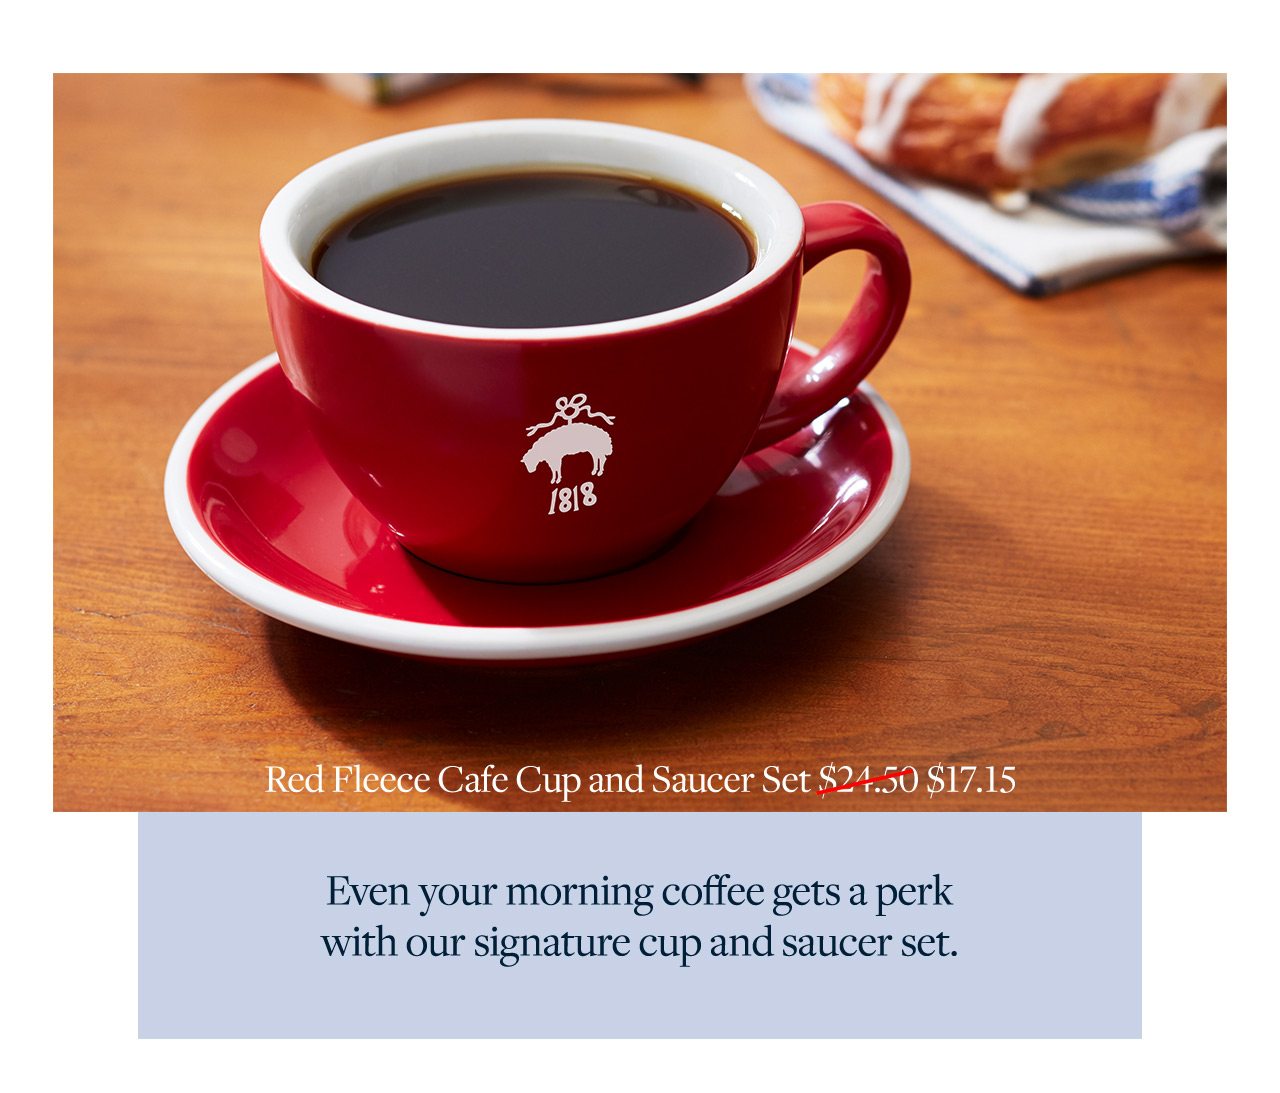 Red Fleece Cafe Cup and Saucer Set $17.15 Even your morning coffee gets a perk with our signature cup and saucer set